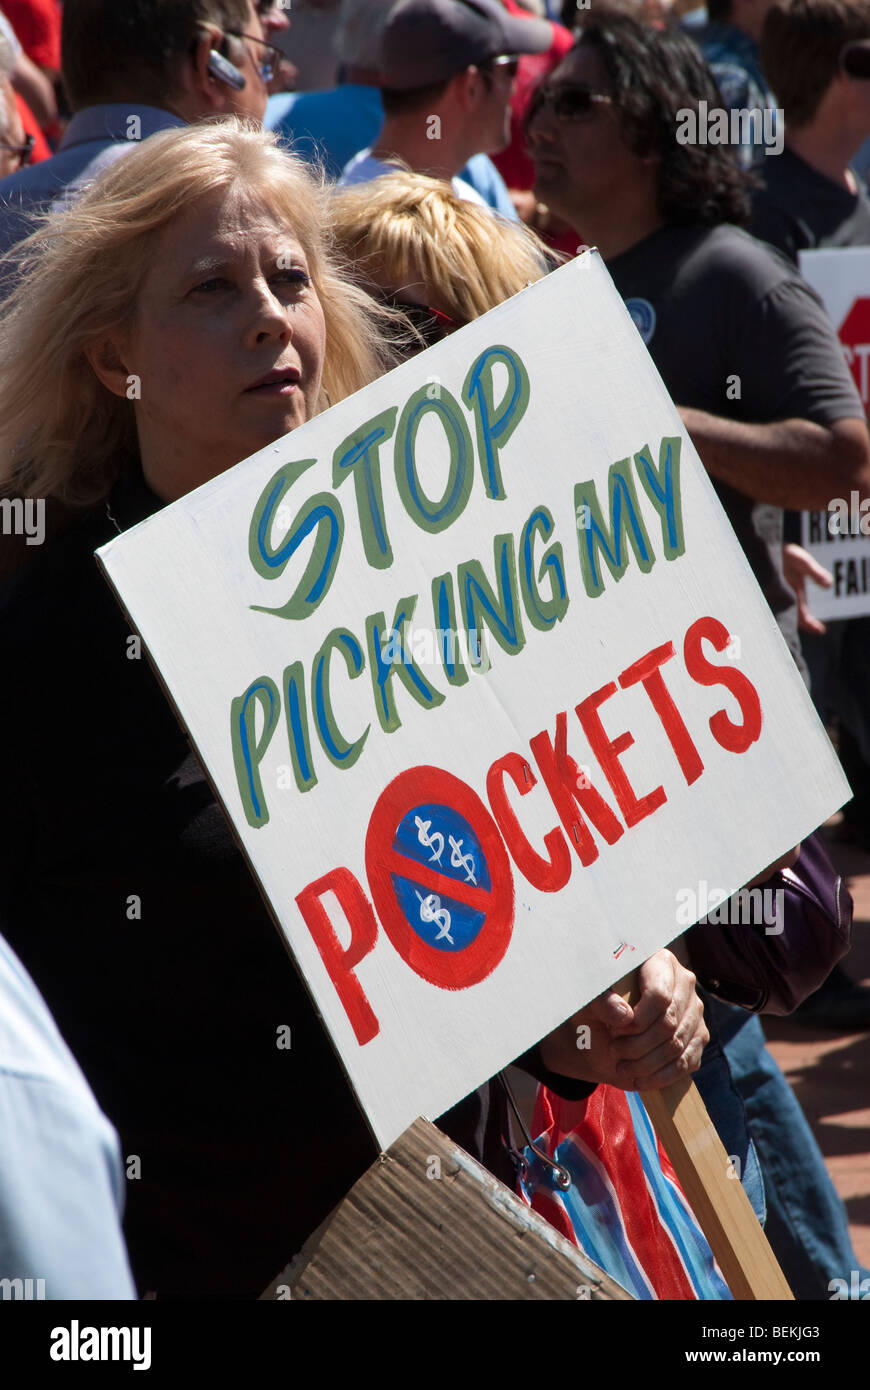 citizens protesting government policies at a Tea Party rally in Arizona Stock Photo